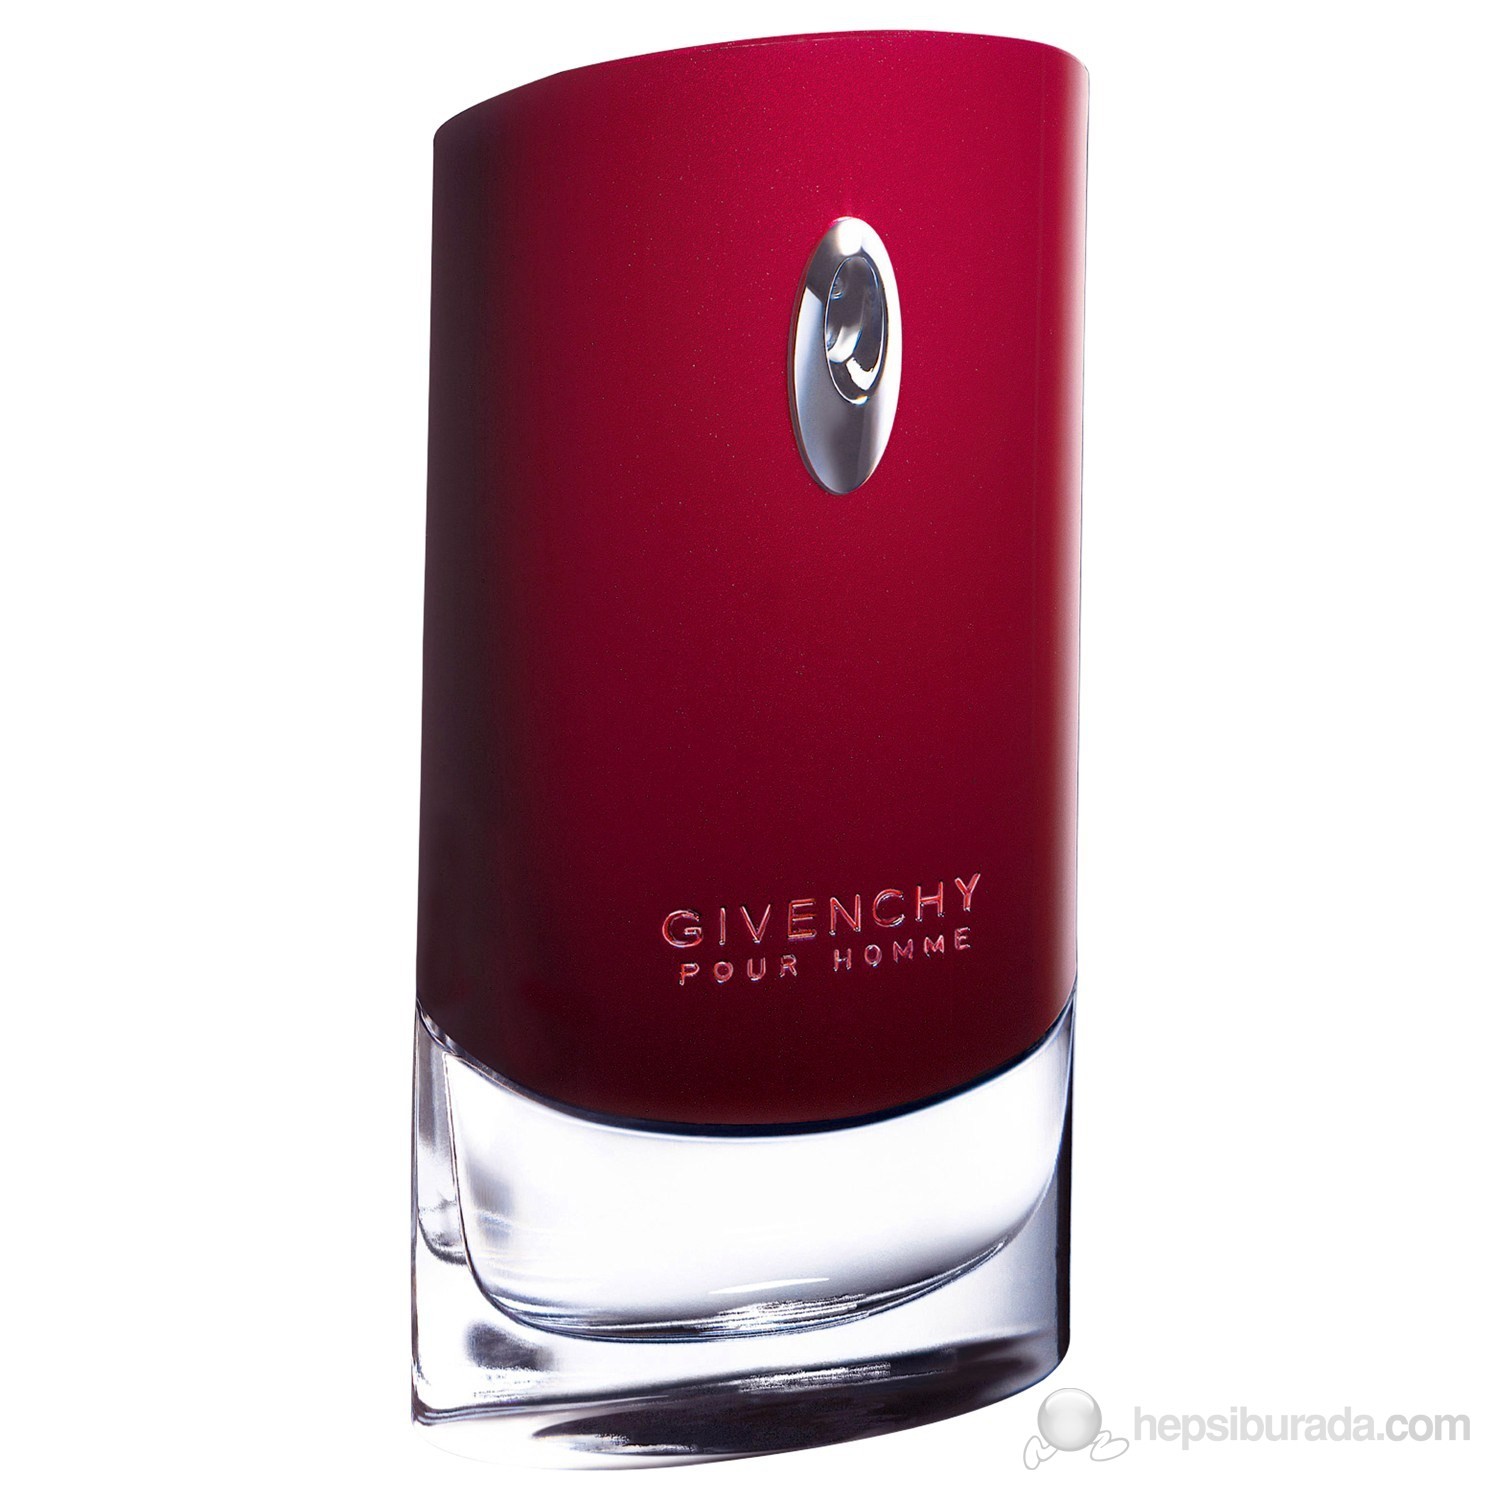 Туалетная вода givenchy pour homme. Givenchy "pour homme" EDT, 100ml. Givenchy pour homme Givenchy. Givenchy Givenchy pour homme, 100 ml. Givenchy pour homme Red.